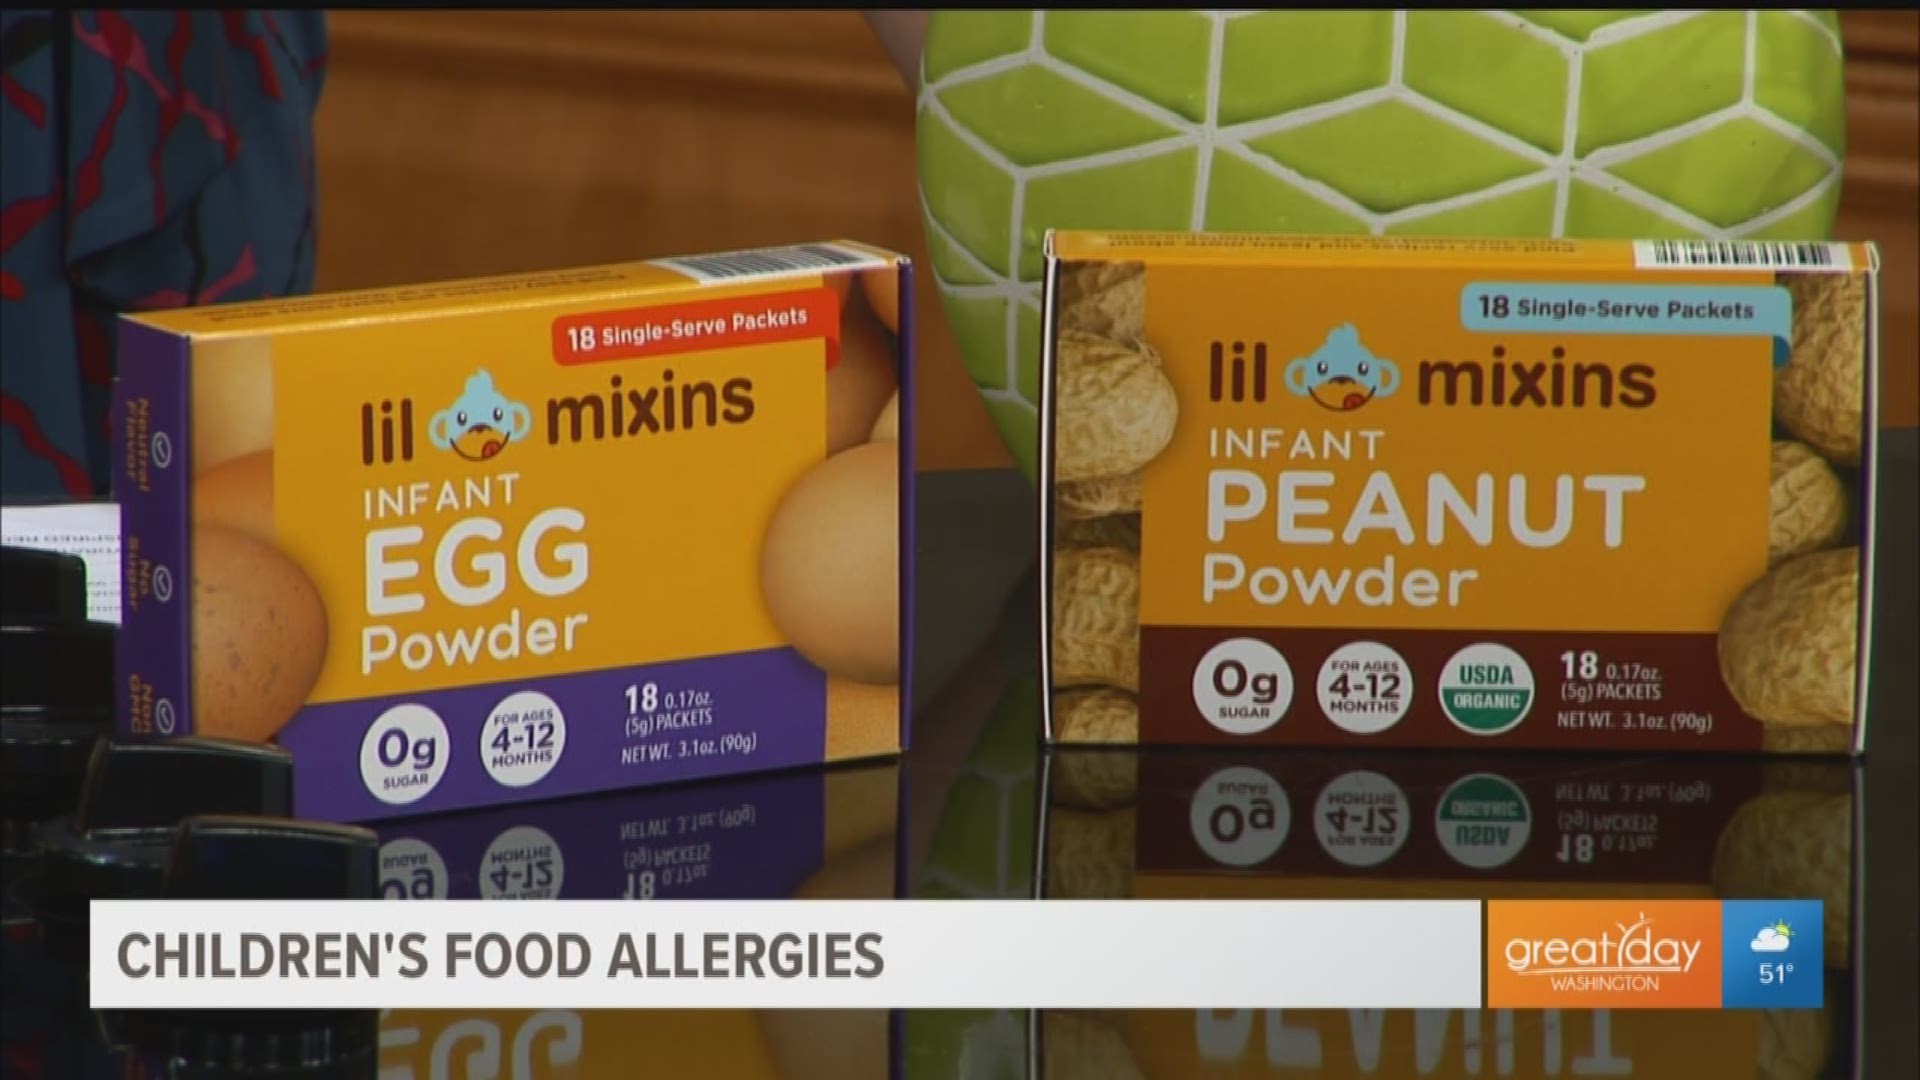 Meenal Lele, creator of Lil Mixins talks about how important it was for her to incorporate nuts and eggs into her baby's diet to prevent food allergies.